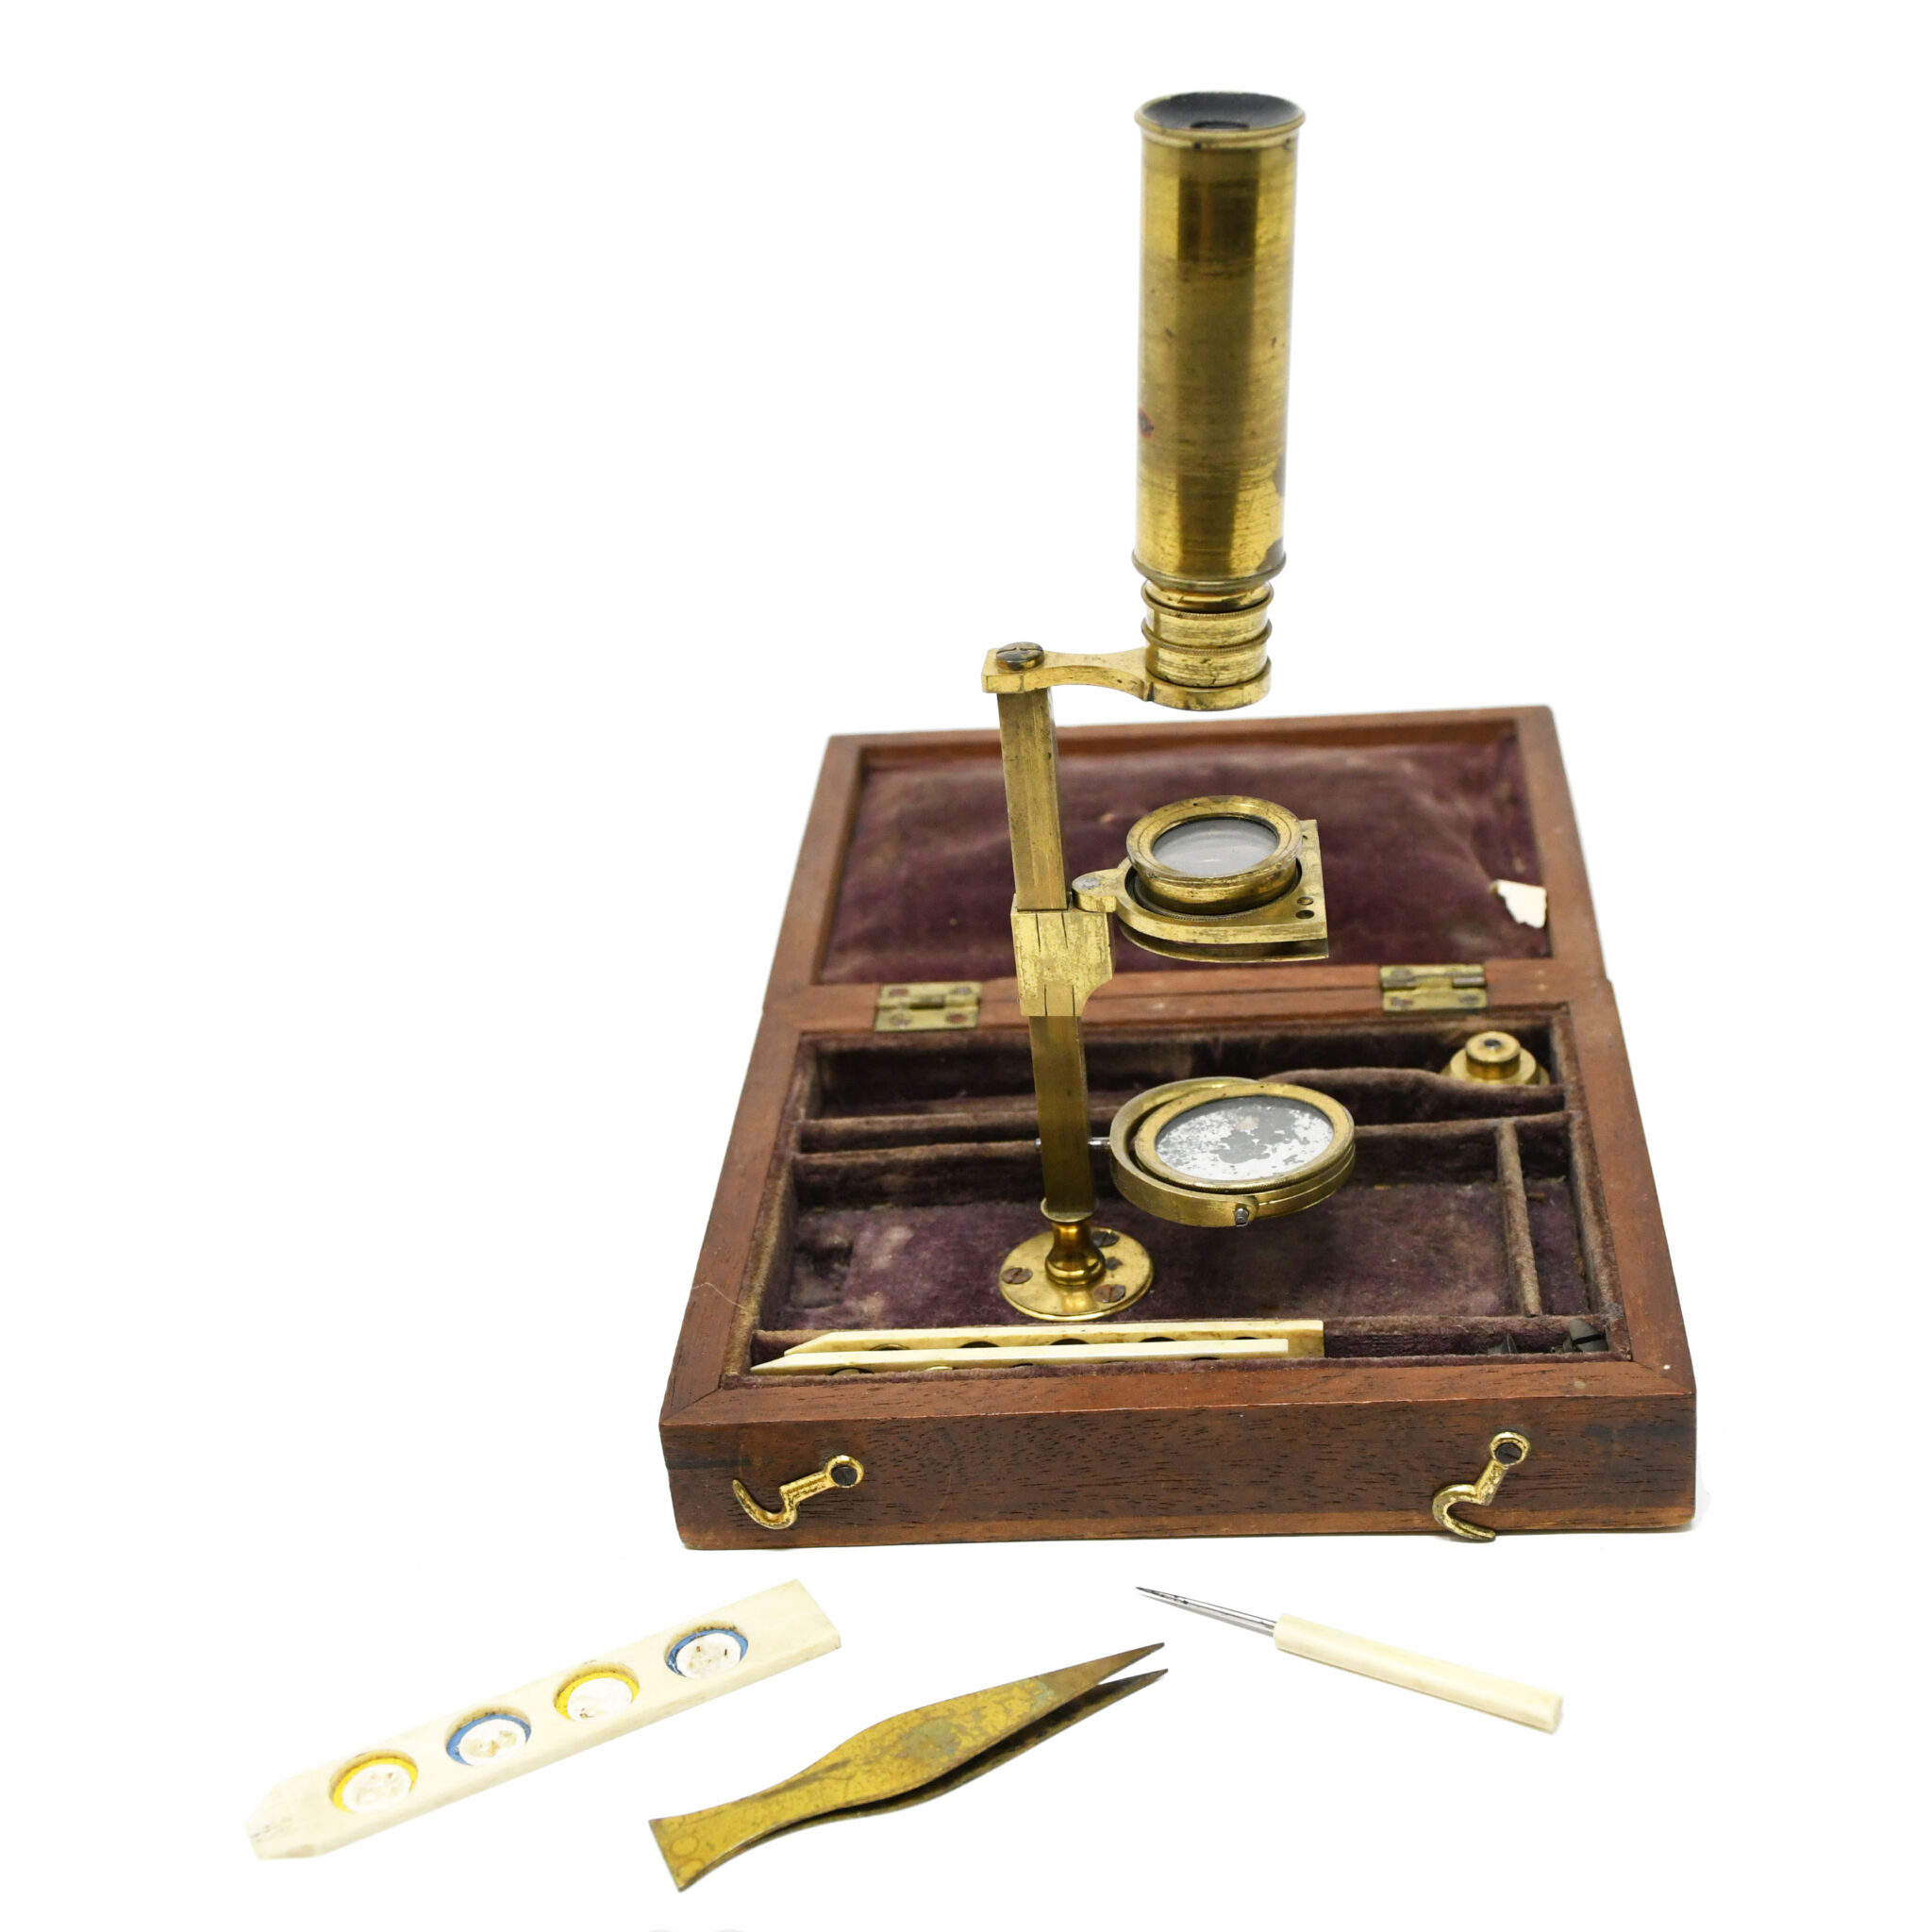 A fine first half 19th-century case-mounted pocket compound microscope